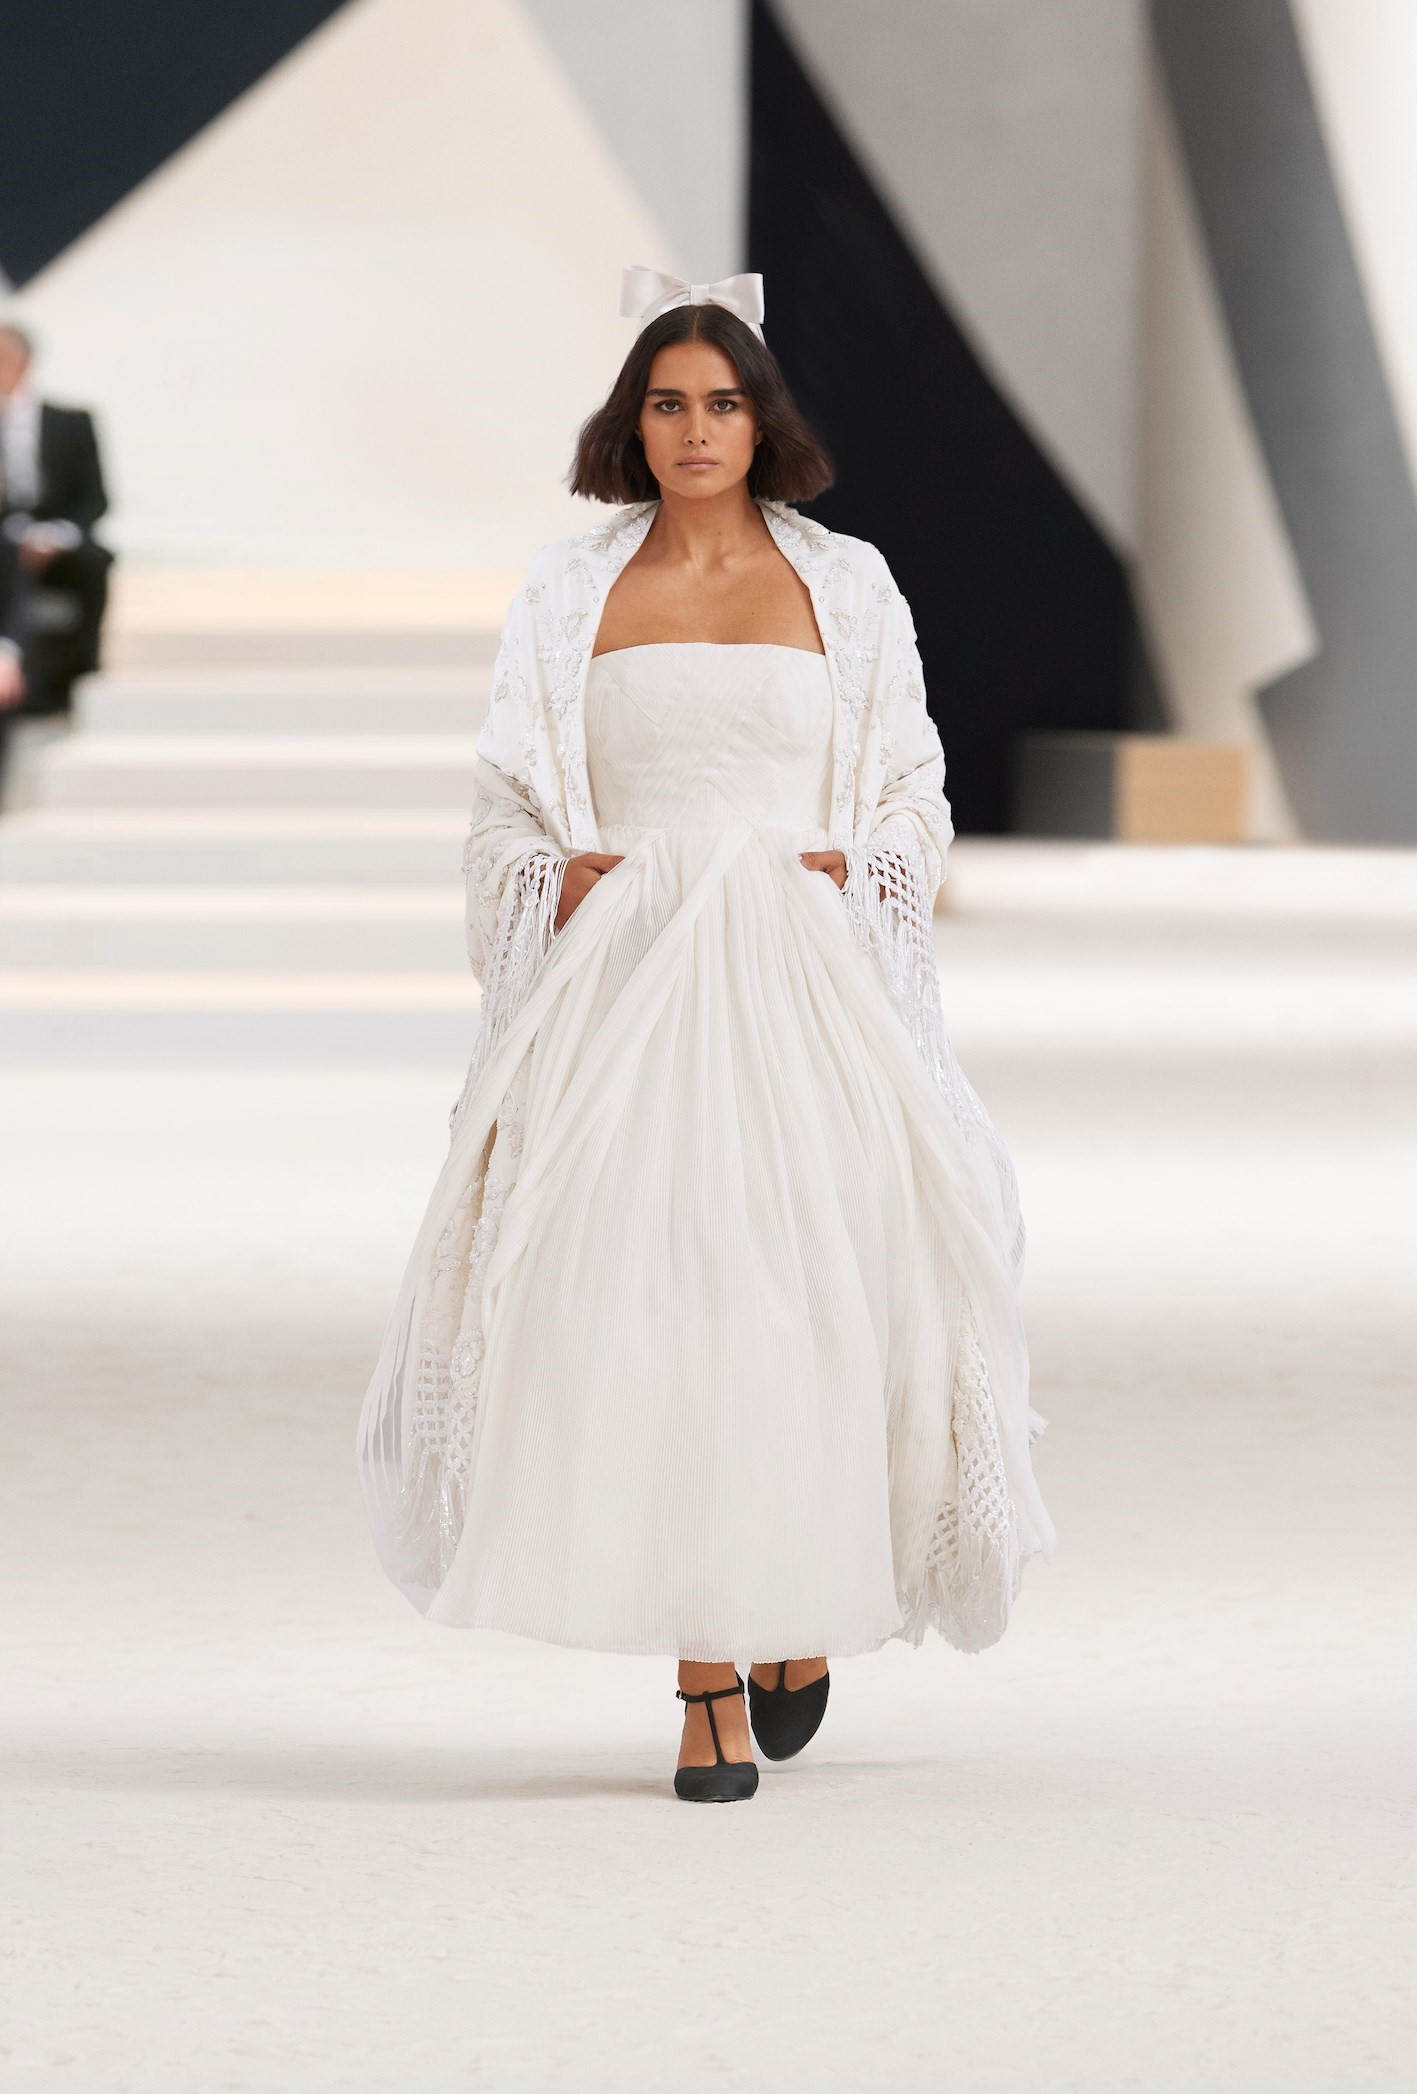 Why Chanel's Latest Couture Show Was About An Evolution, Not A Revolution |  AnOther